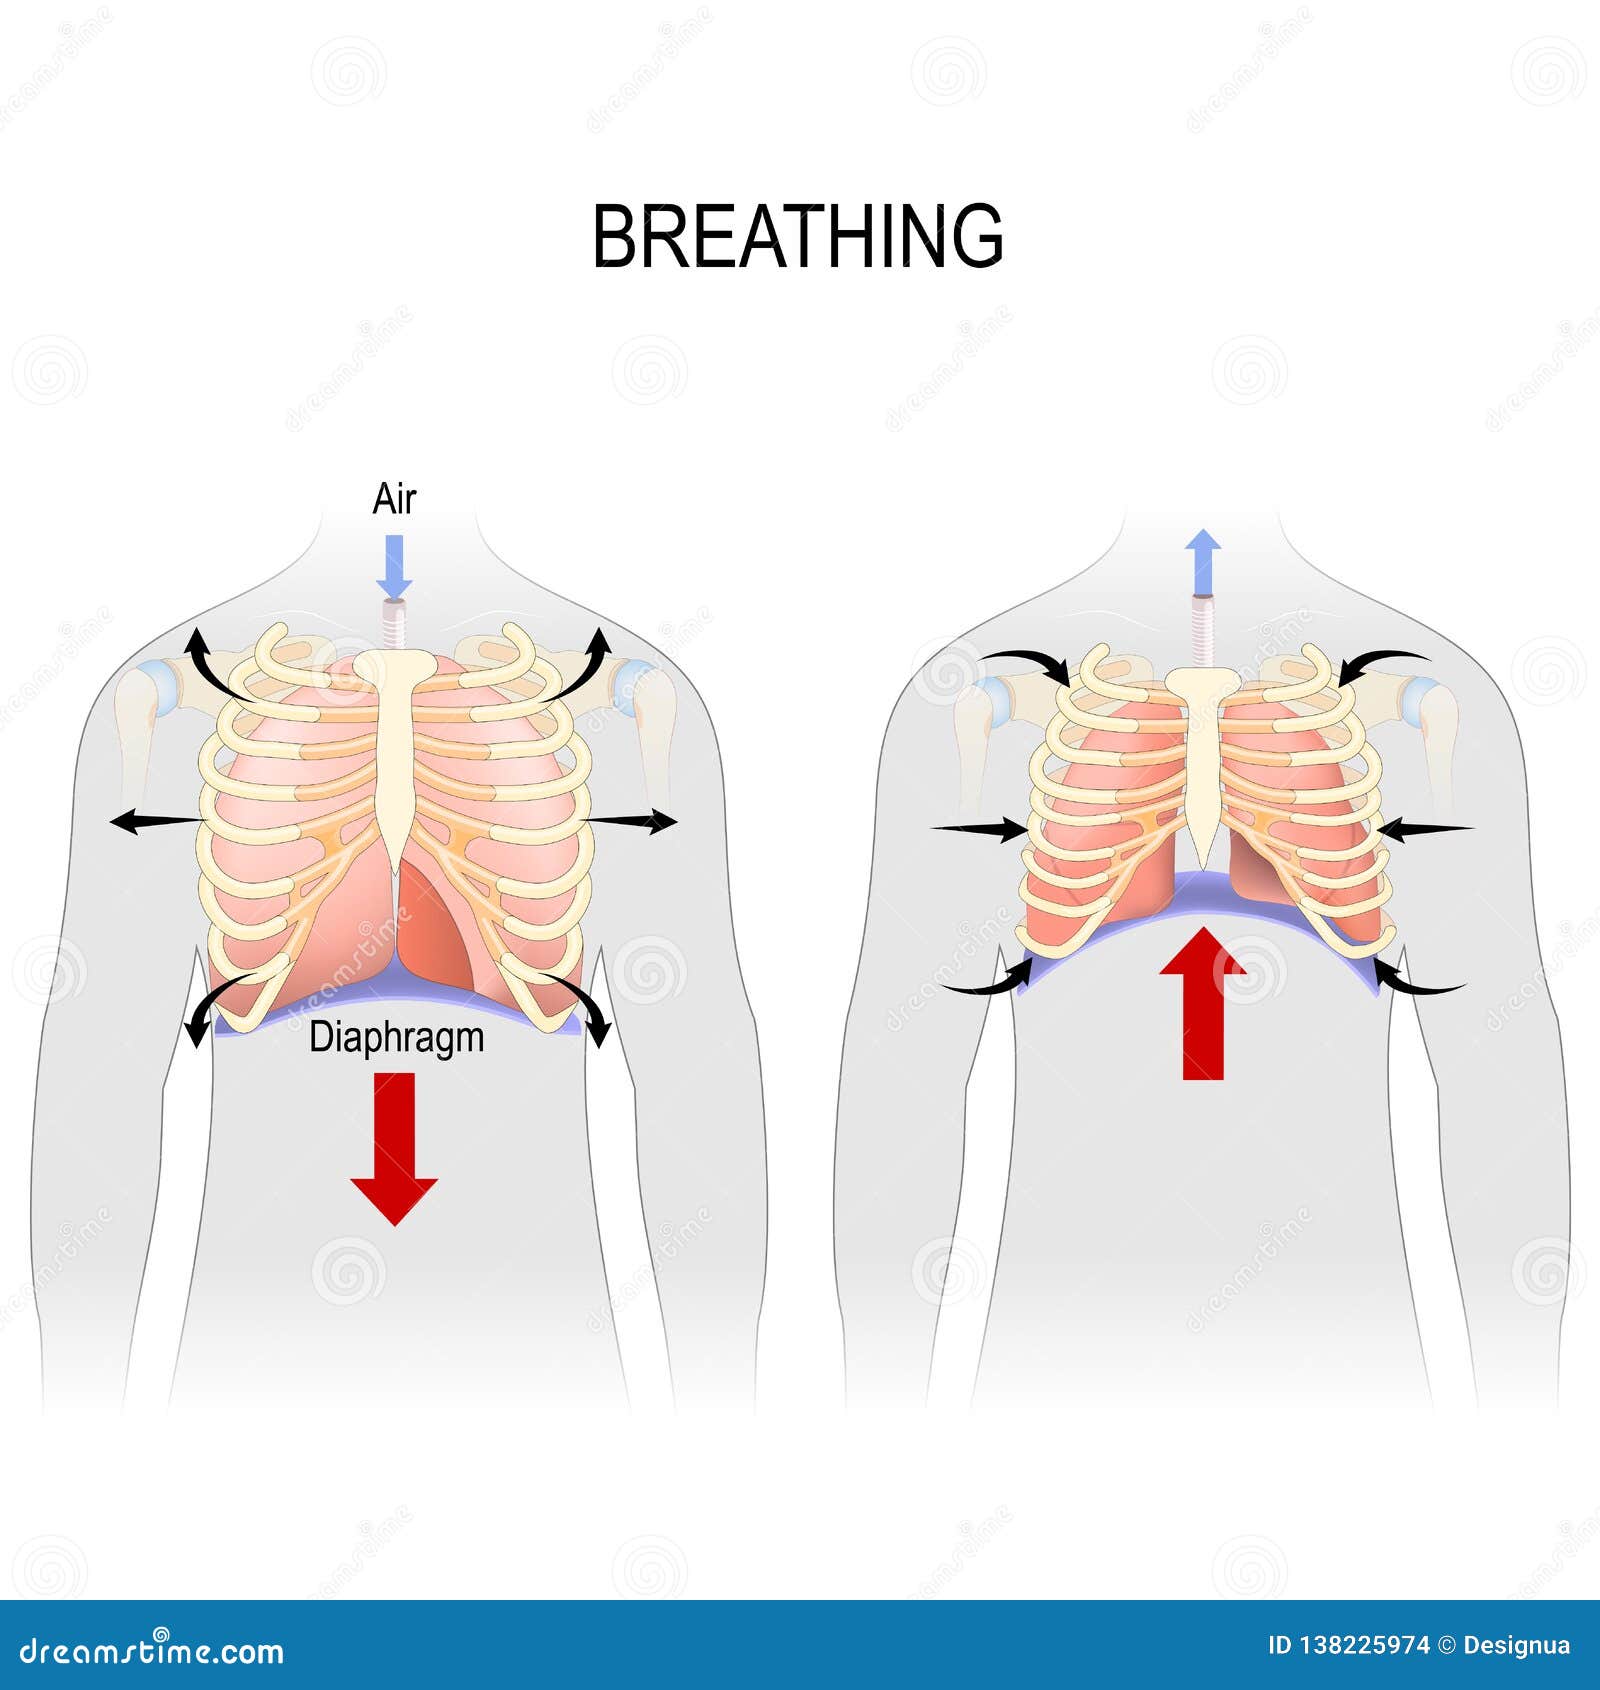 Diaphragmatic Breathing For Copd The Request Could Not Be Satisfied